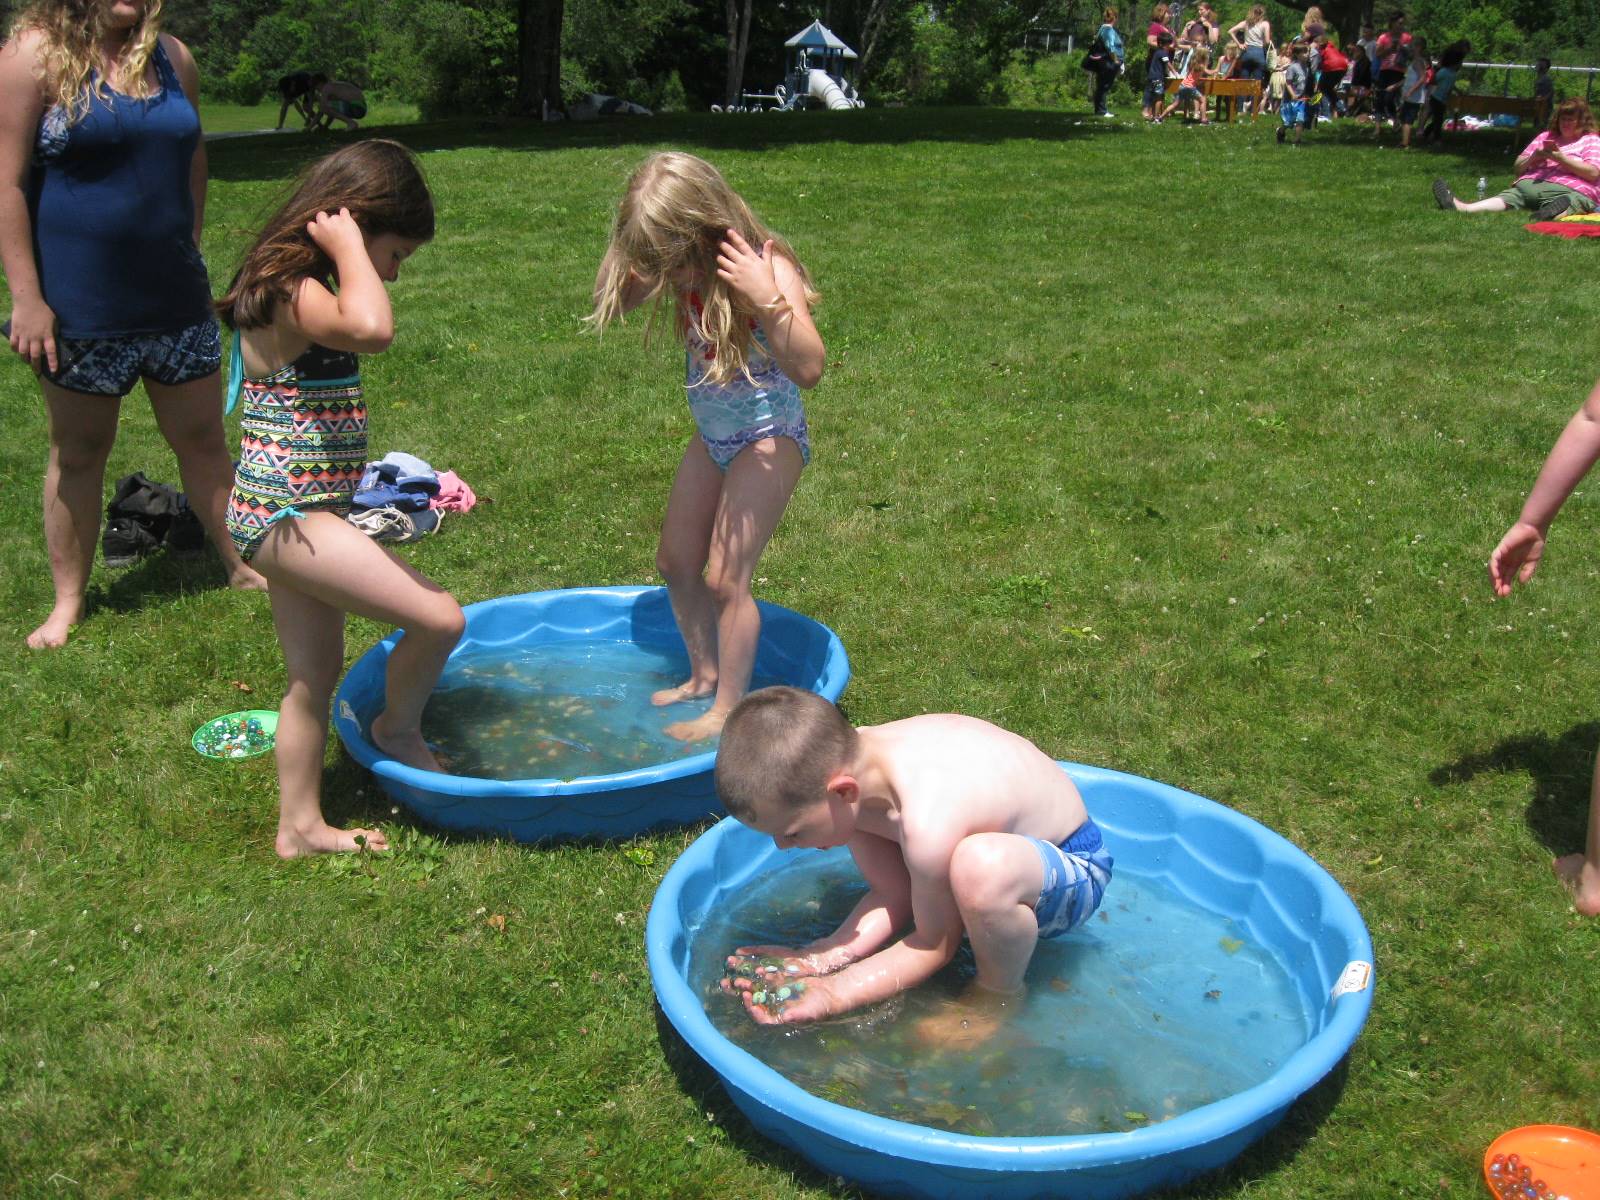 3 students use toes to get marbles out of a wading pool.